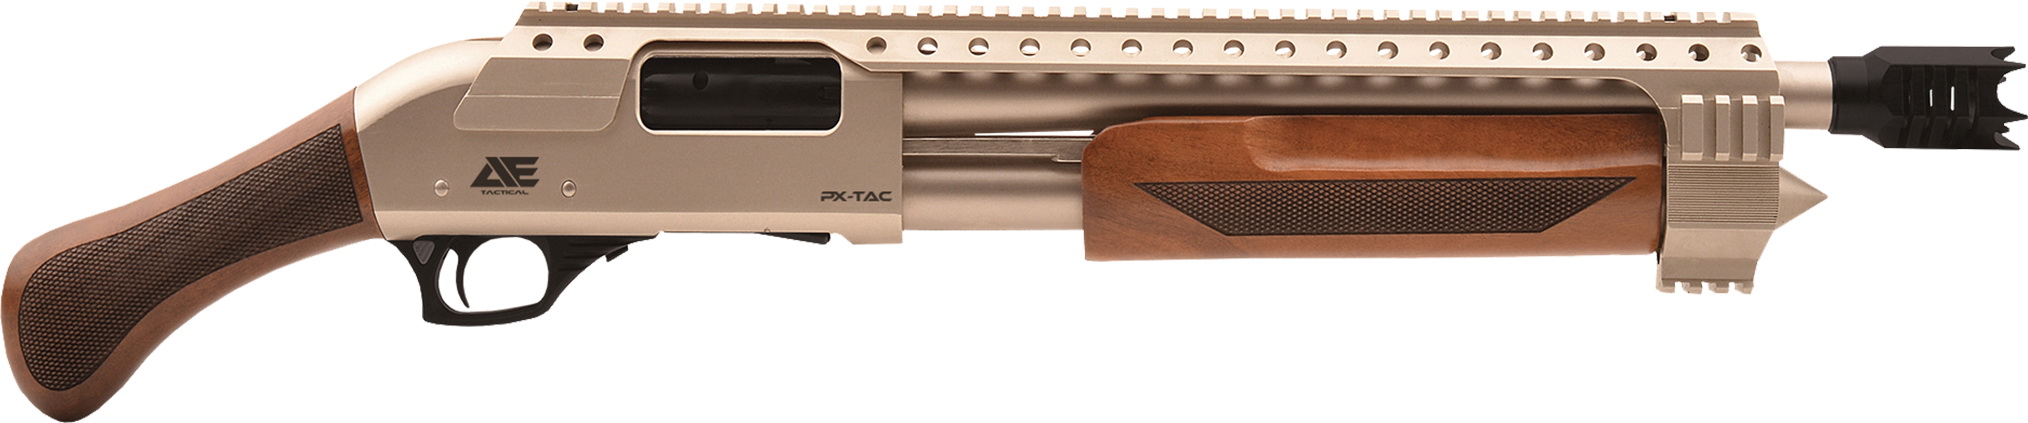 AE TACTICAL PX TAC 116